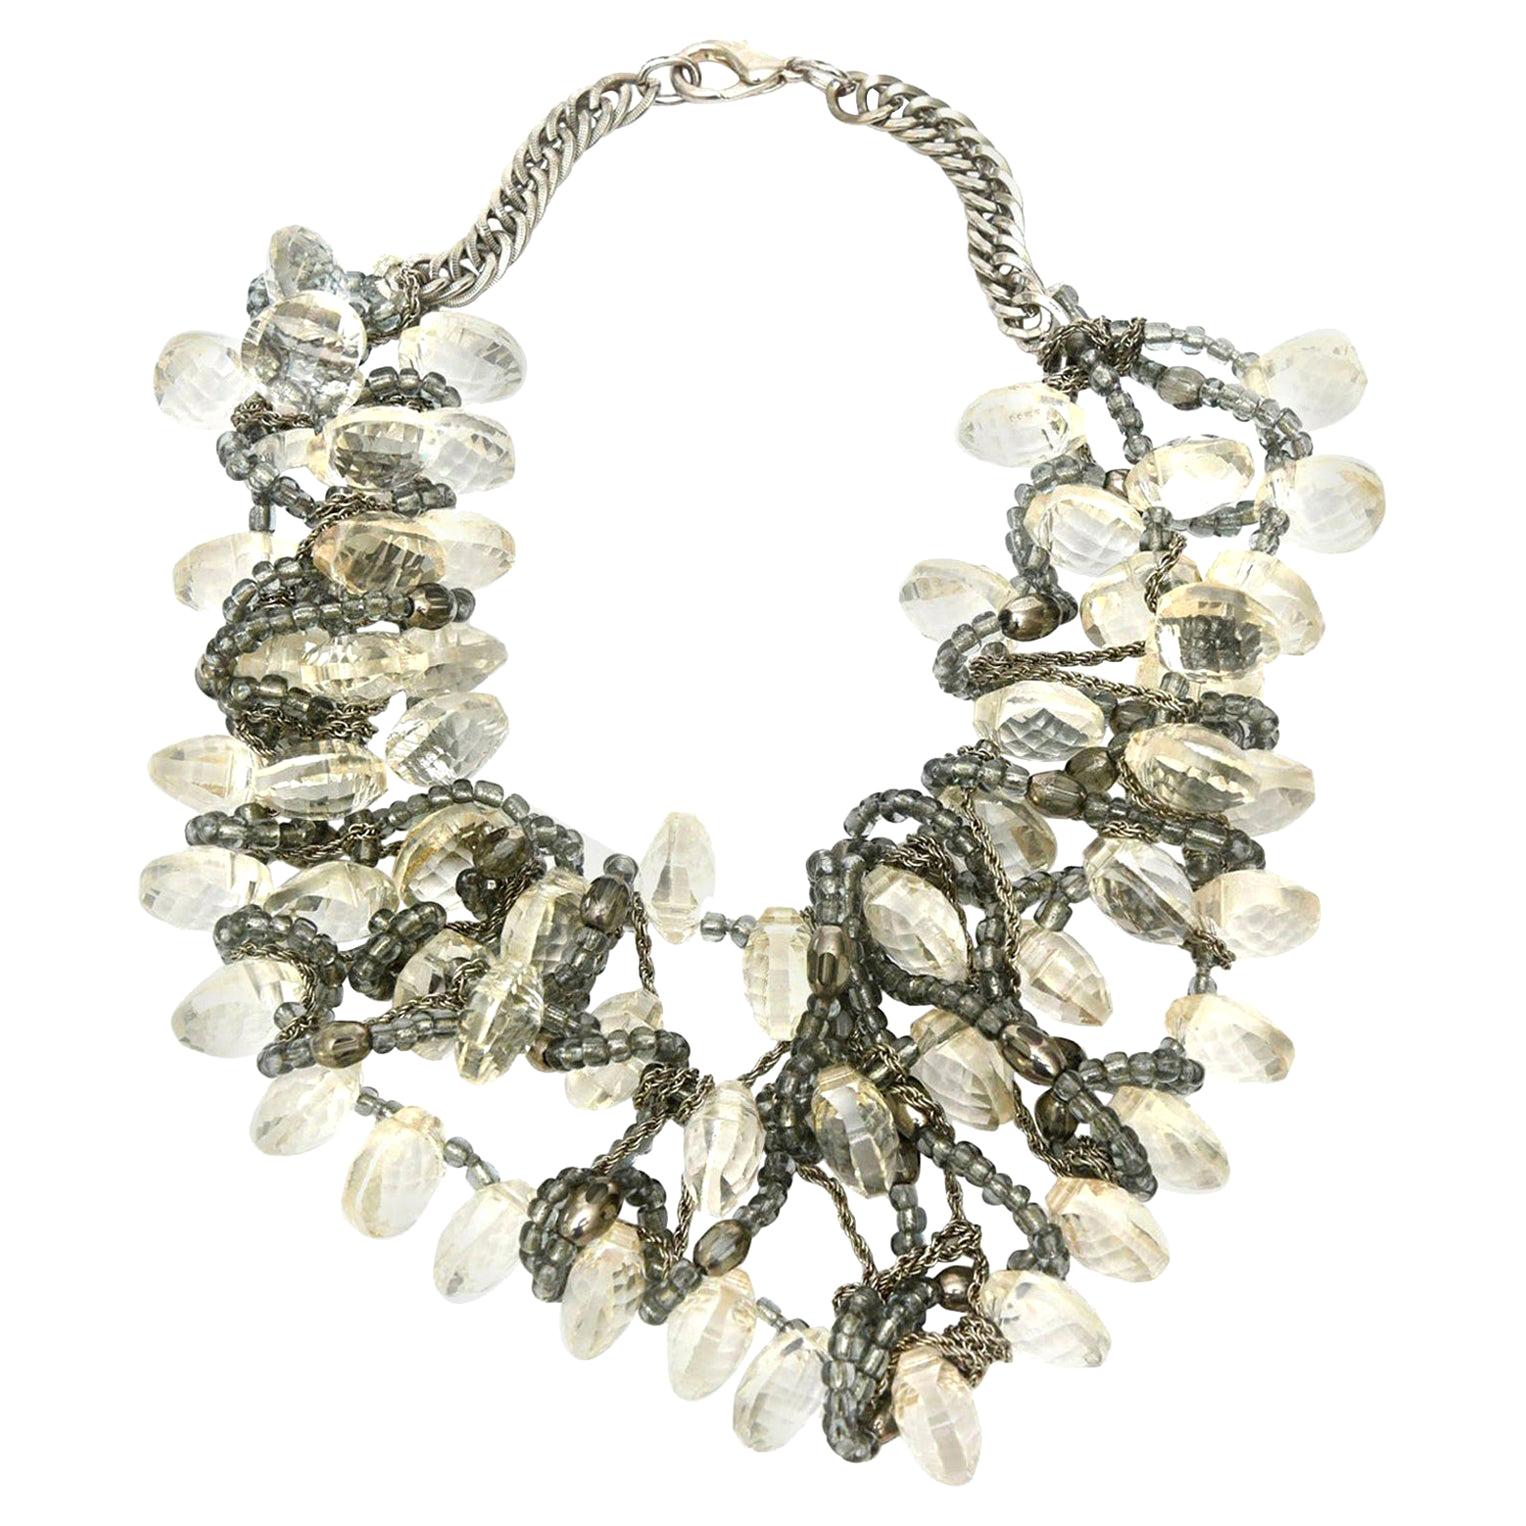  Faceted Lucite Chain, Beads And Silver Bib Multi Strand Necklace Vintage For Sale